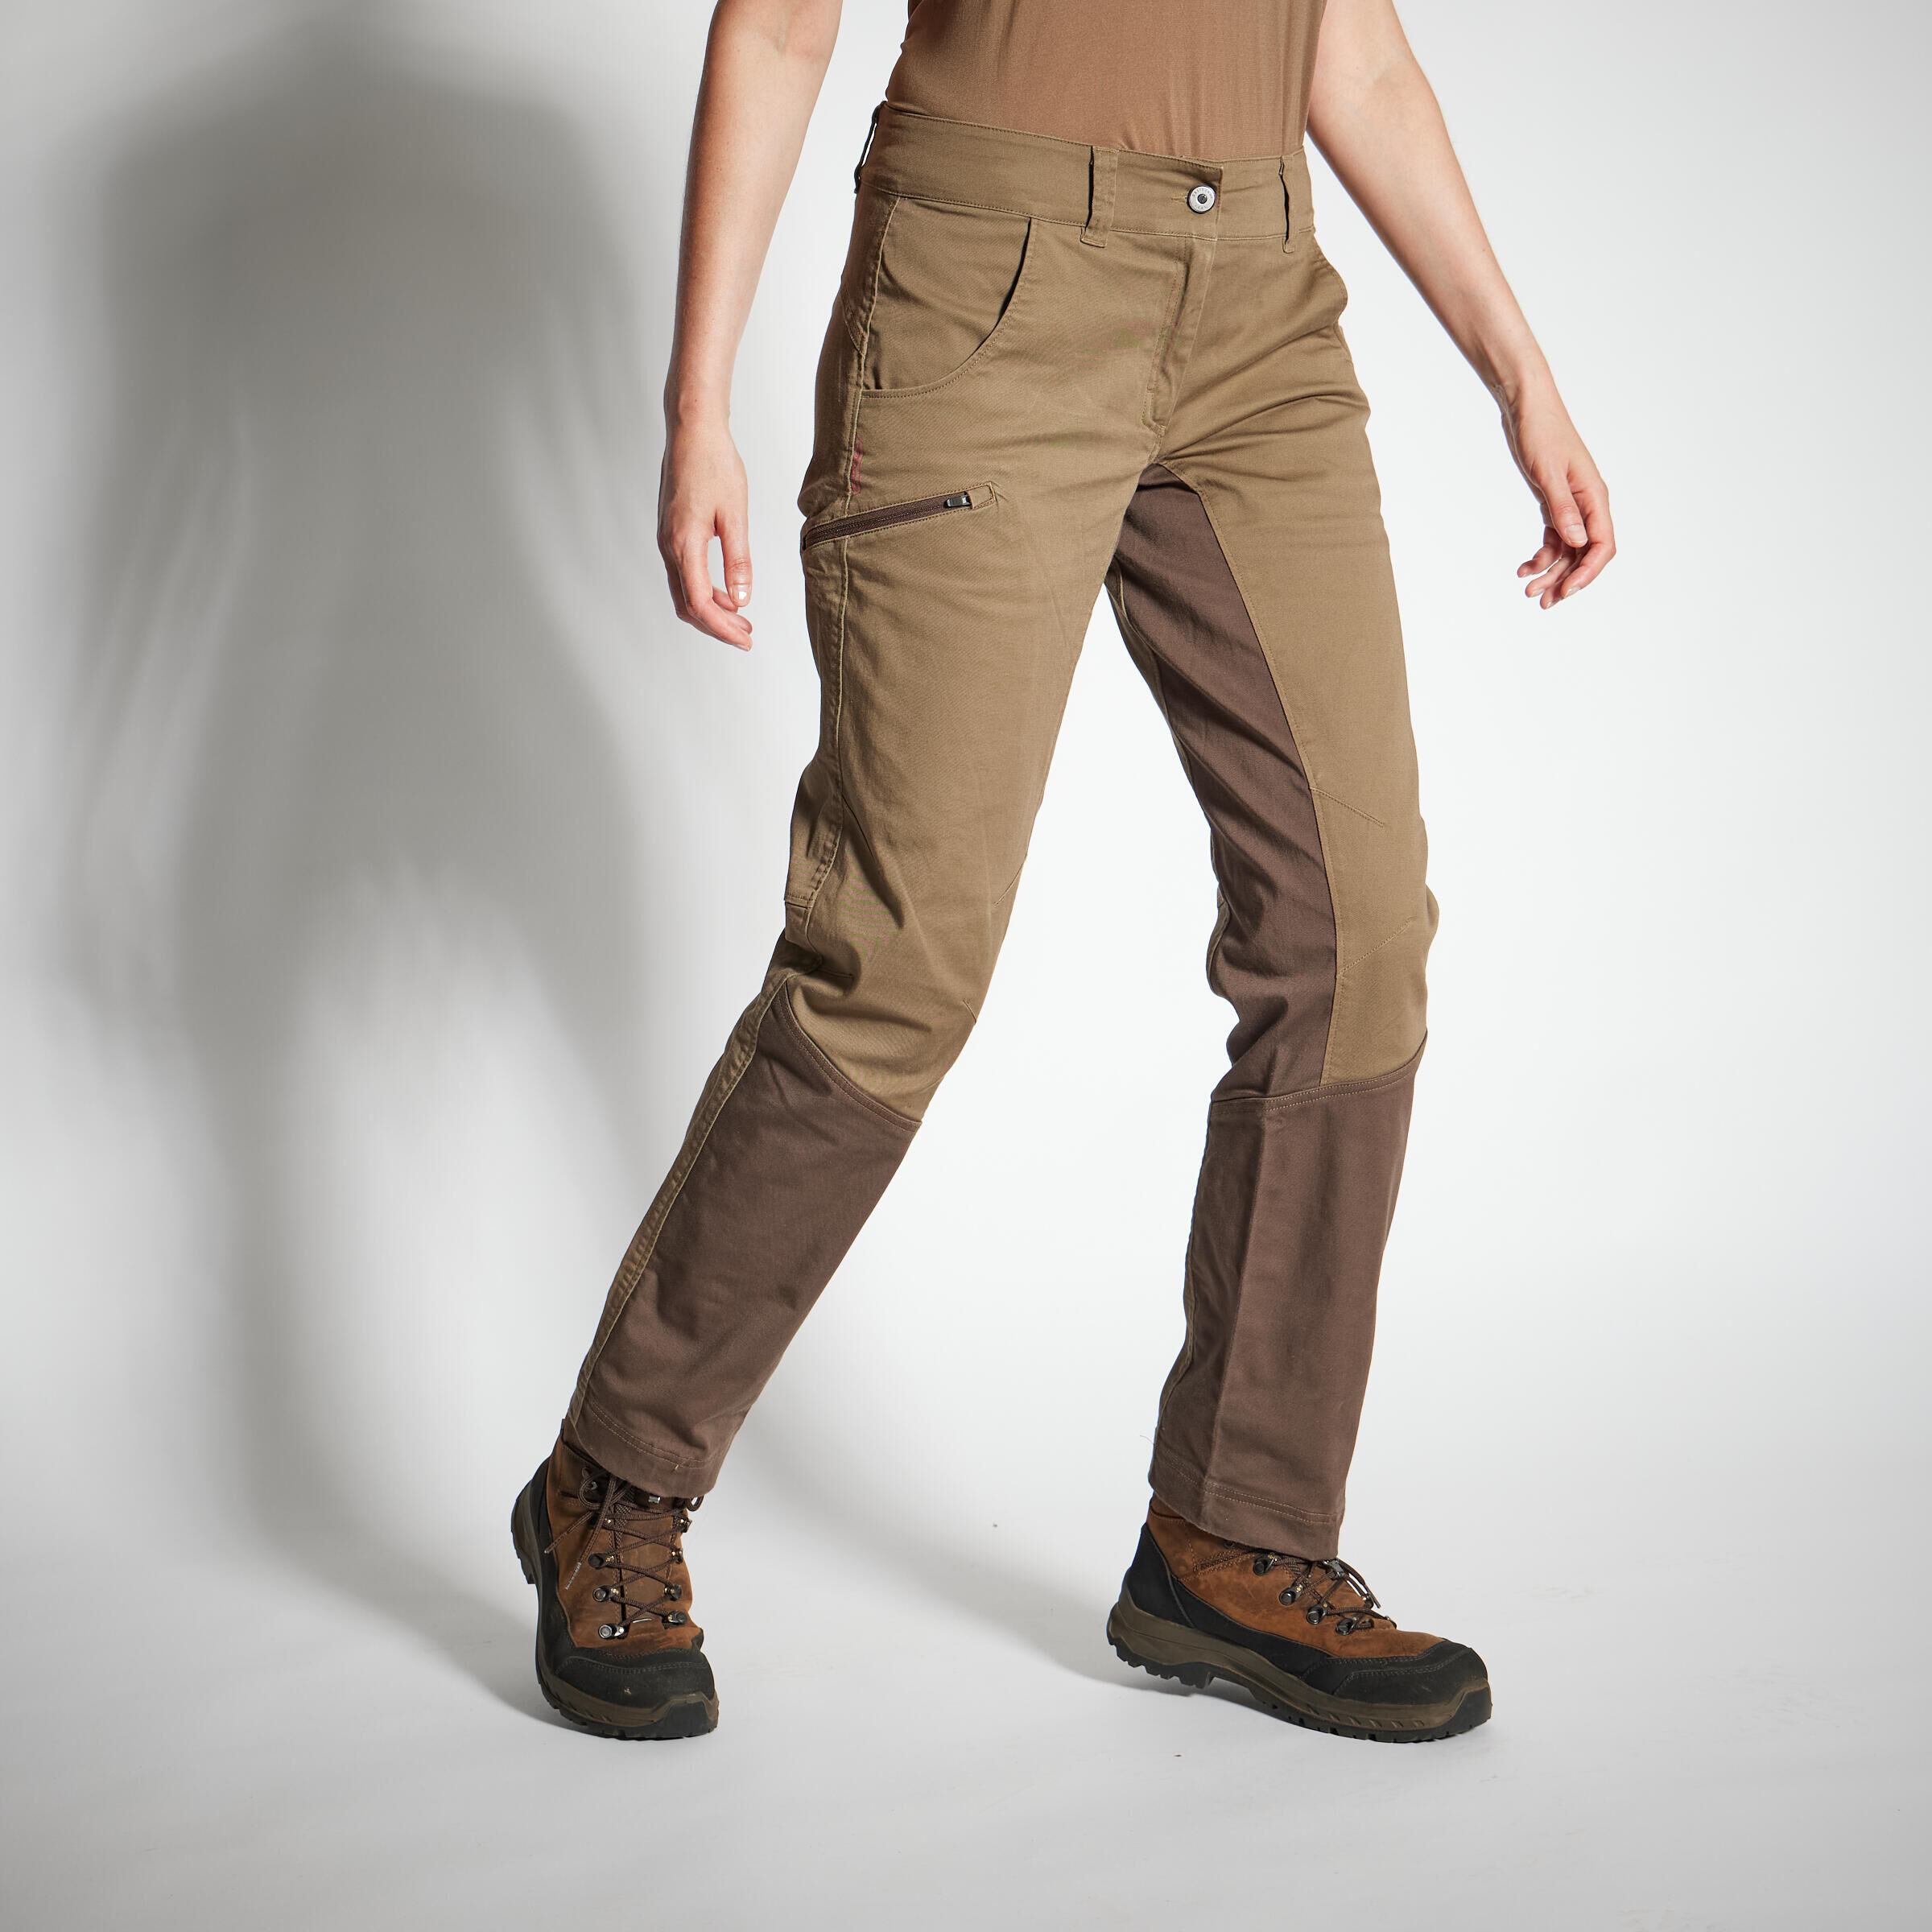 SOLOGNAC WOMEN'S BREATHABLE HUNTING TROUSERS 500 BROWN